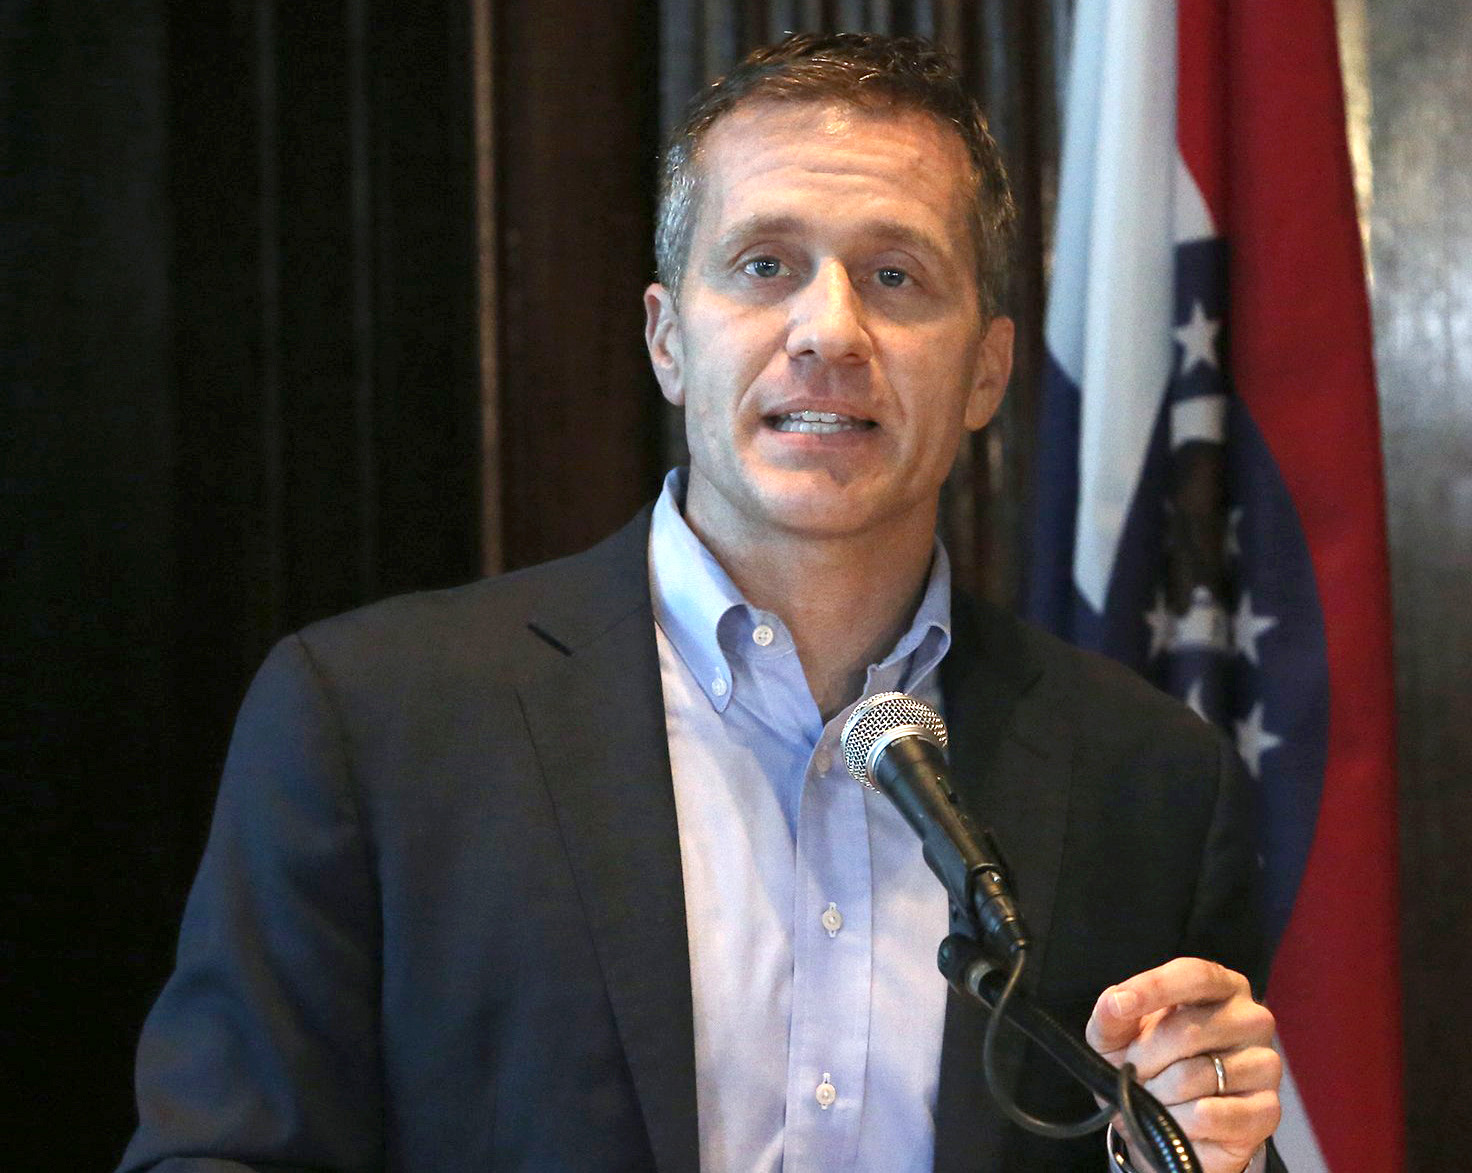 PHOTO: Gov. Eric Greitens spoke at a news conference about a report that was about to come out concerning his affair in 2015, April 11, 2018, Jefferson City, Mo.